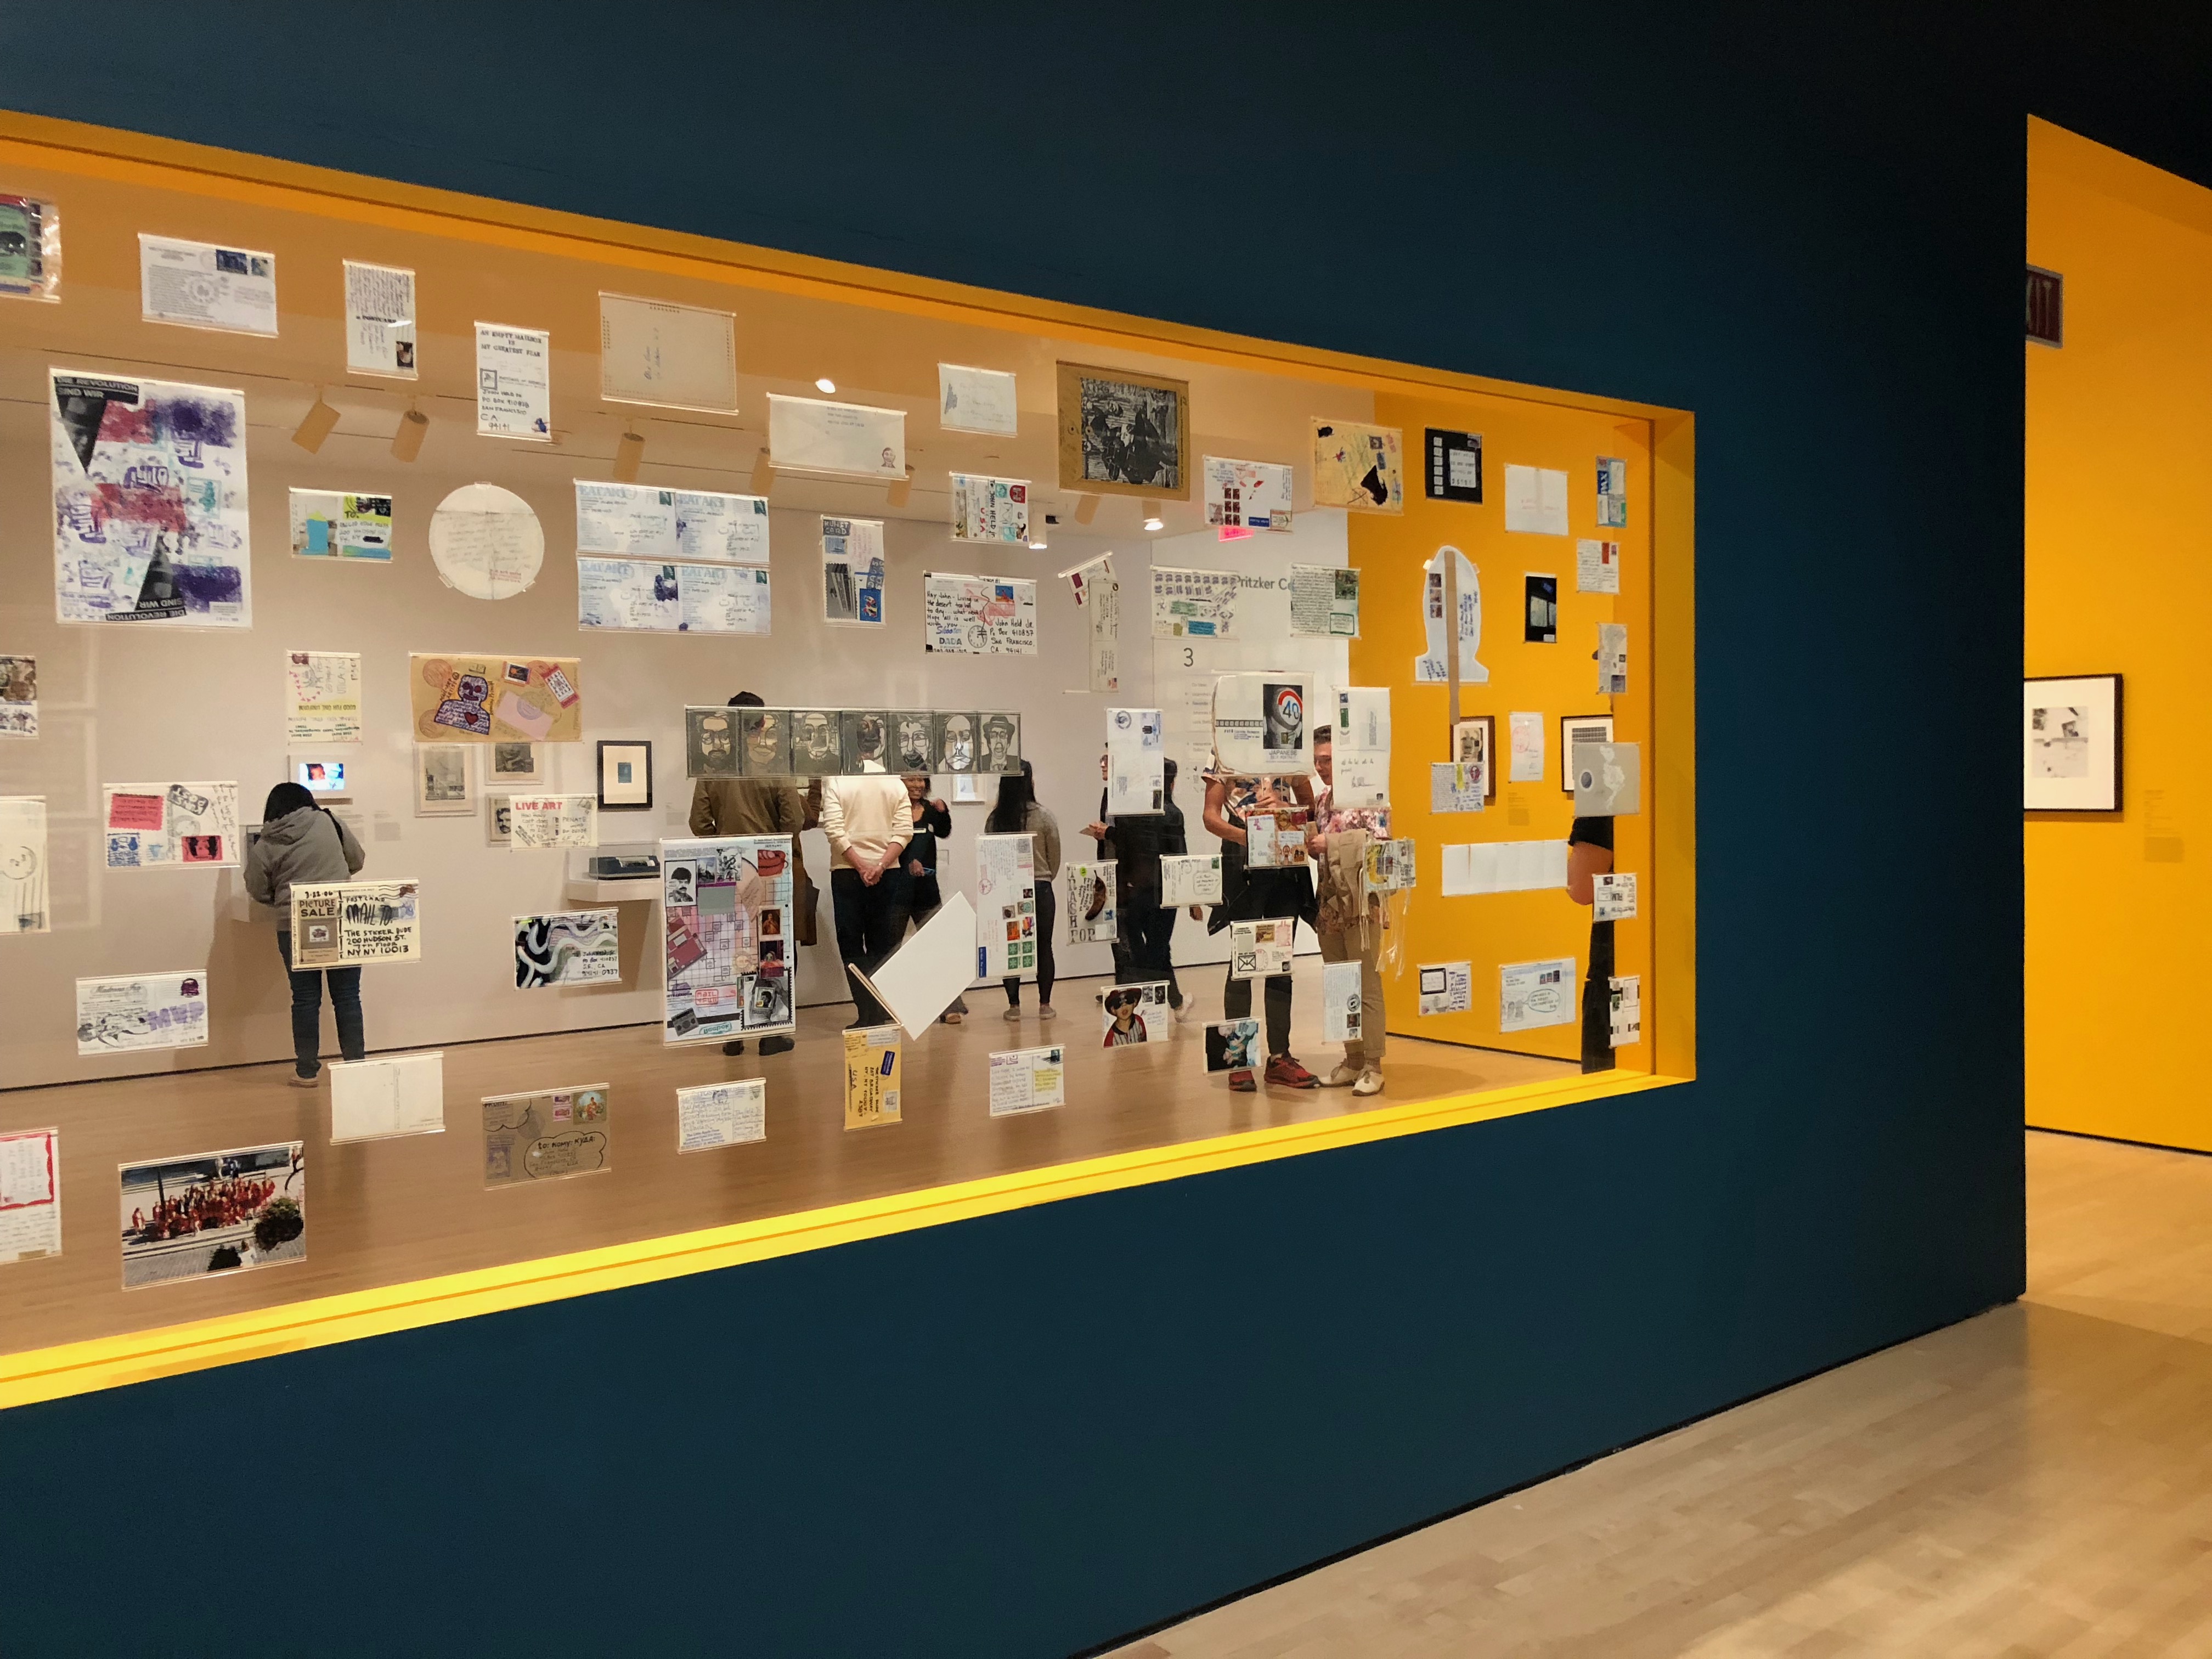 SFMoMA's exhibition on snap and share